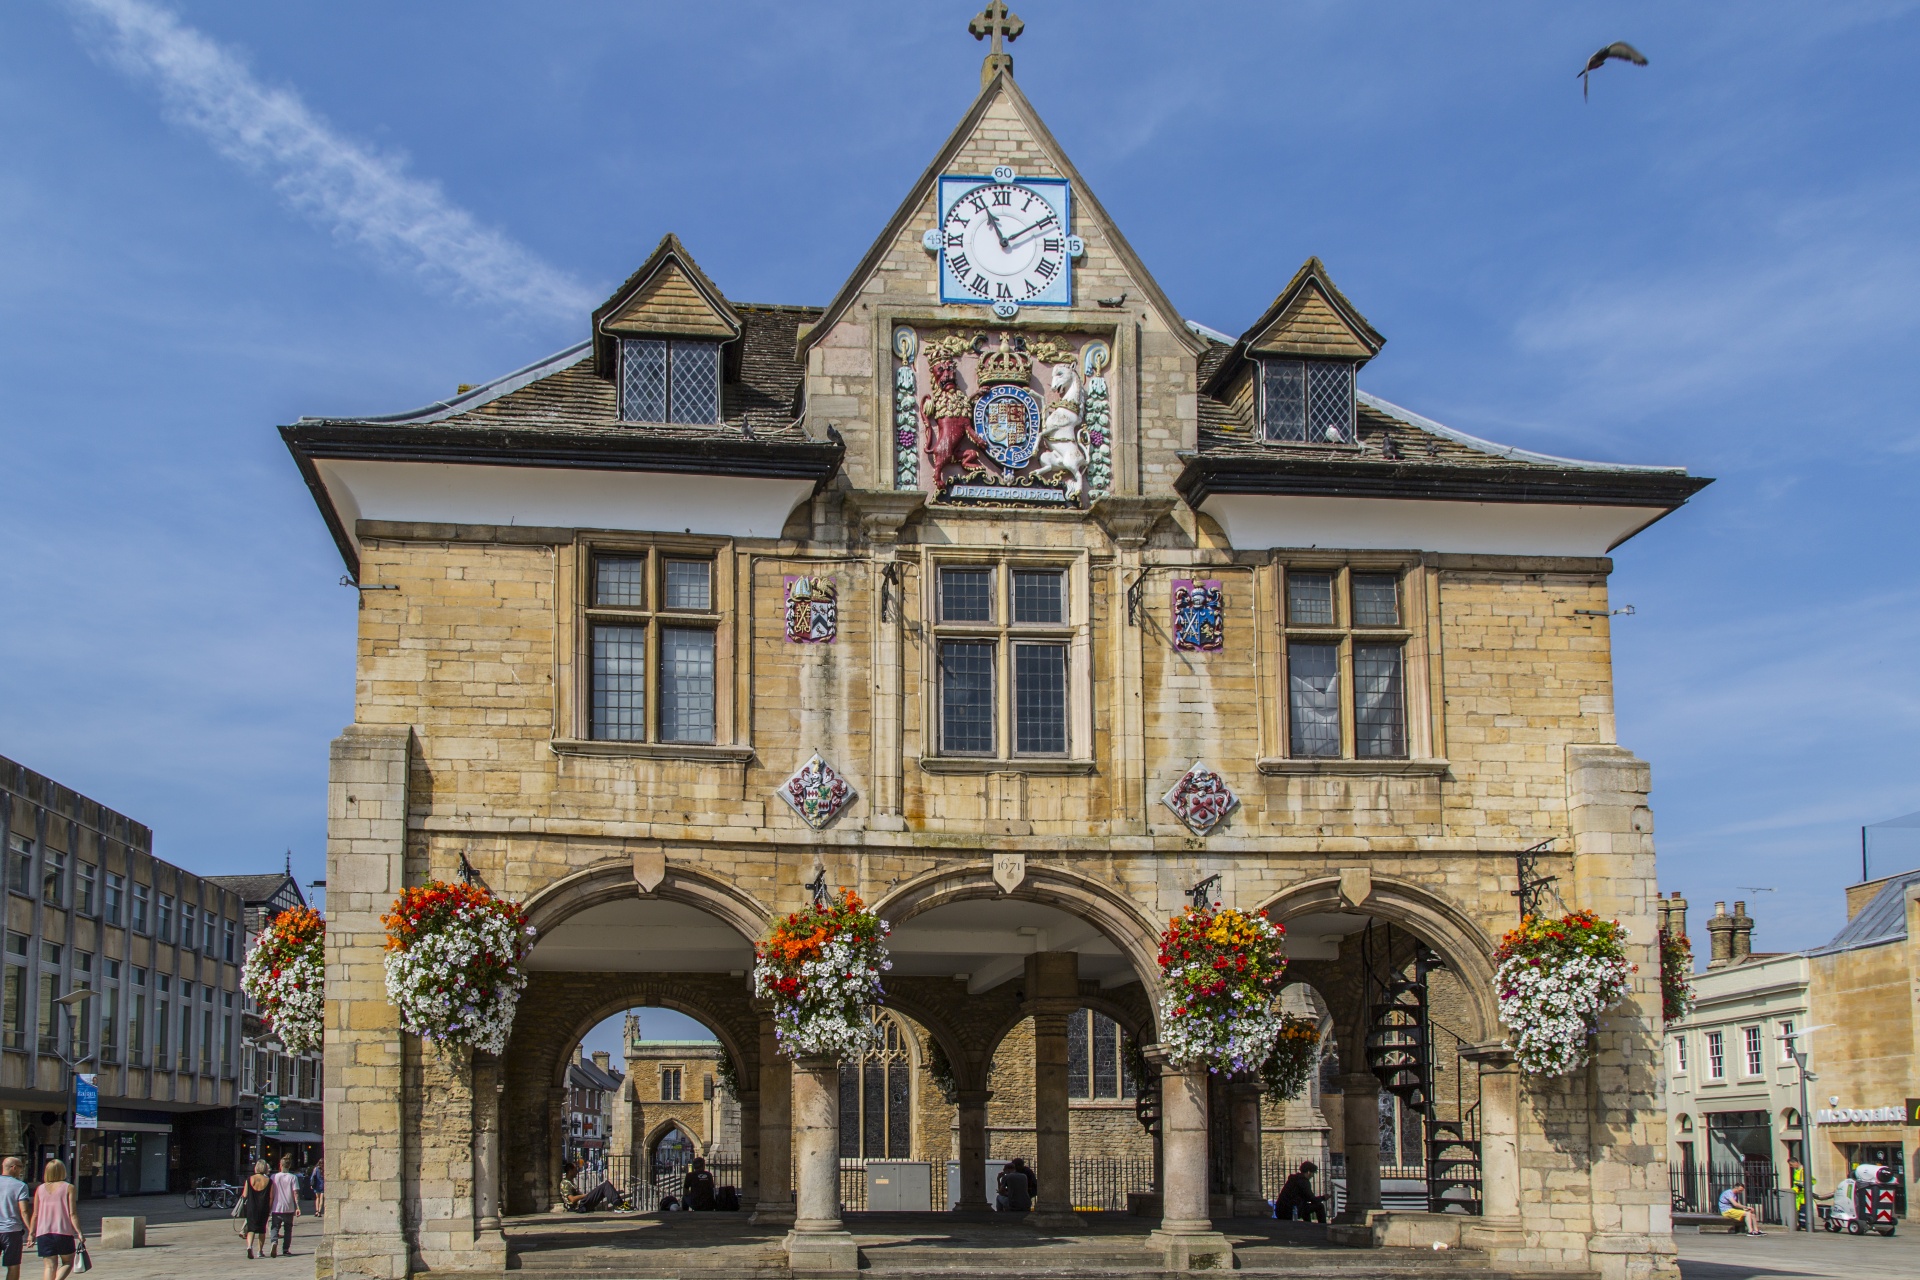 The Guildhall, Peterborough